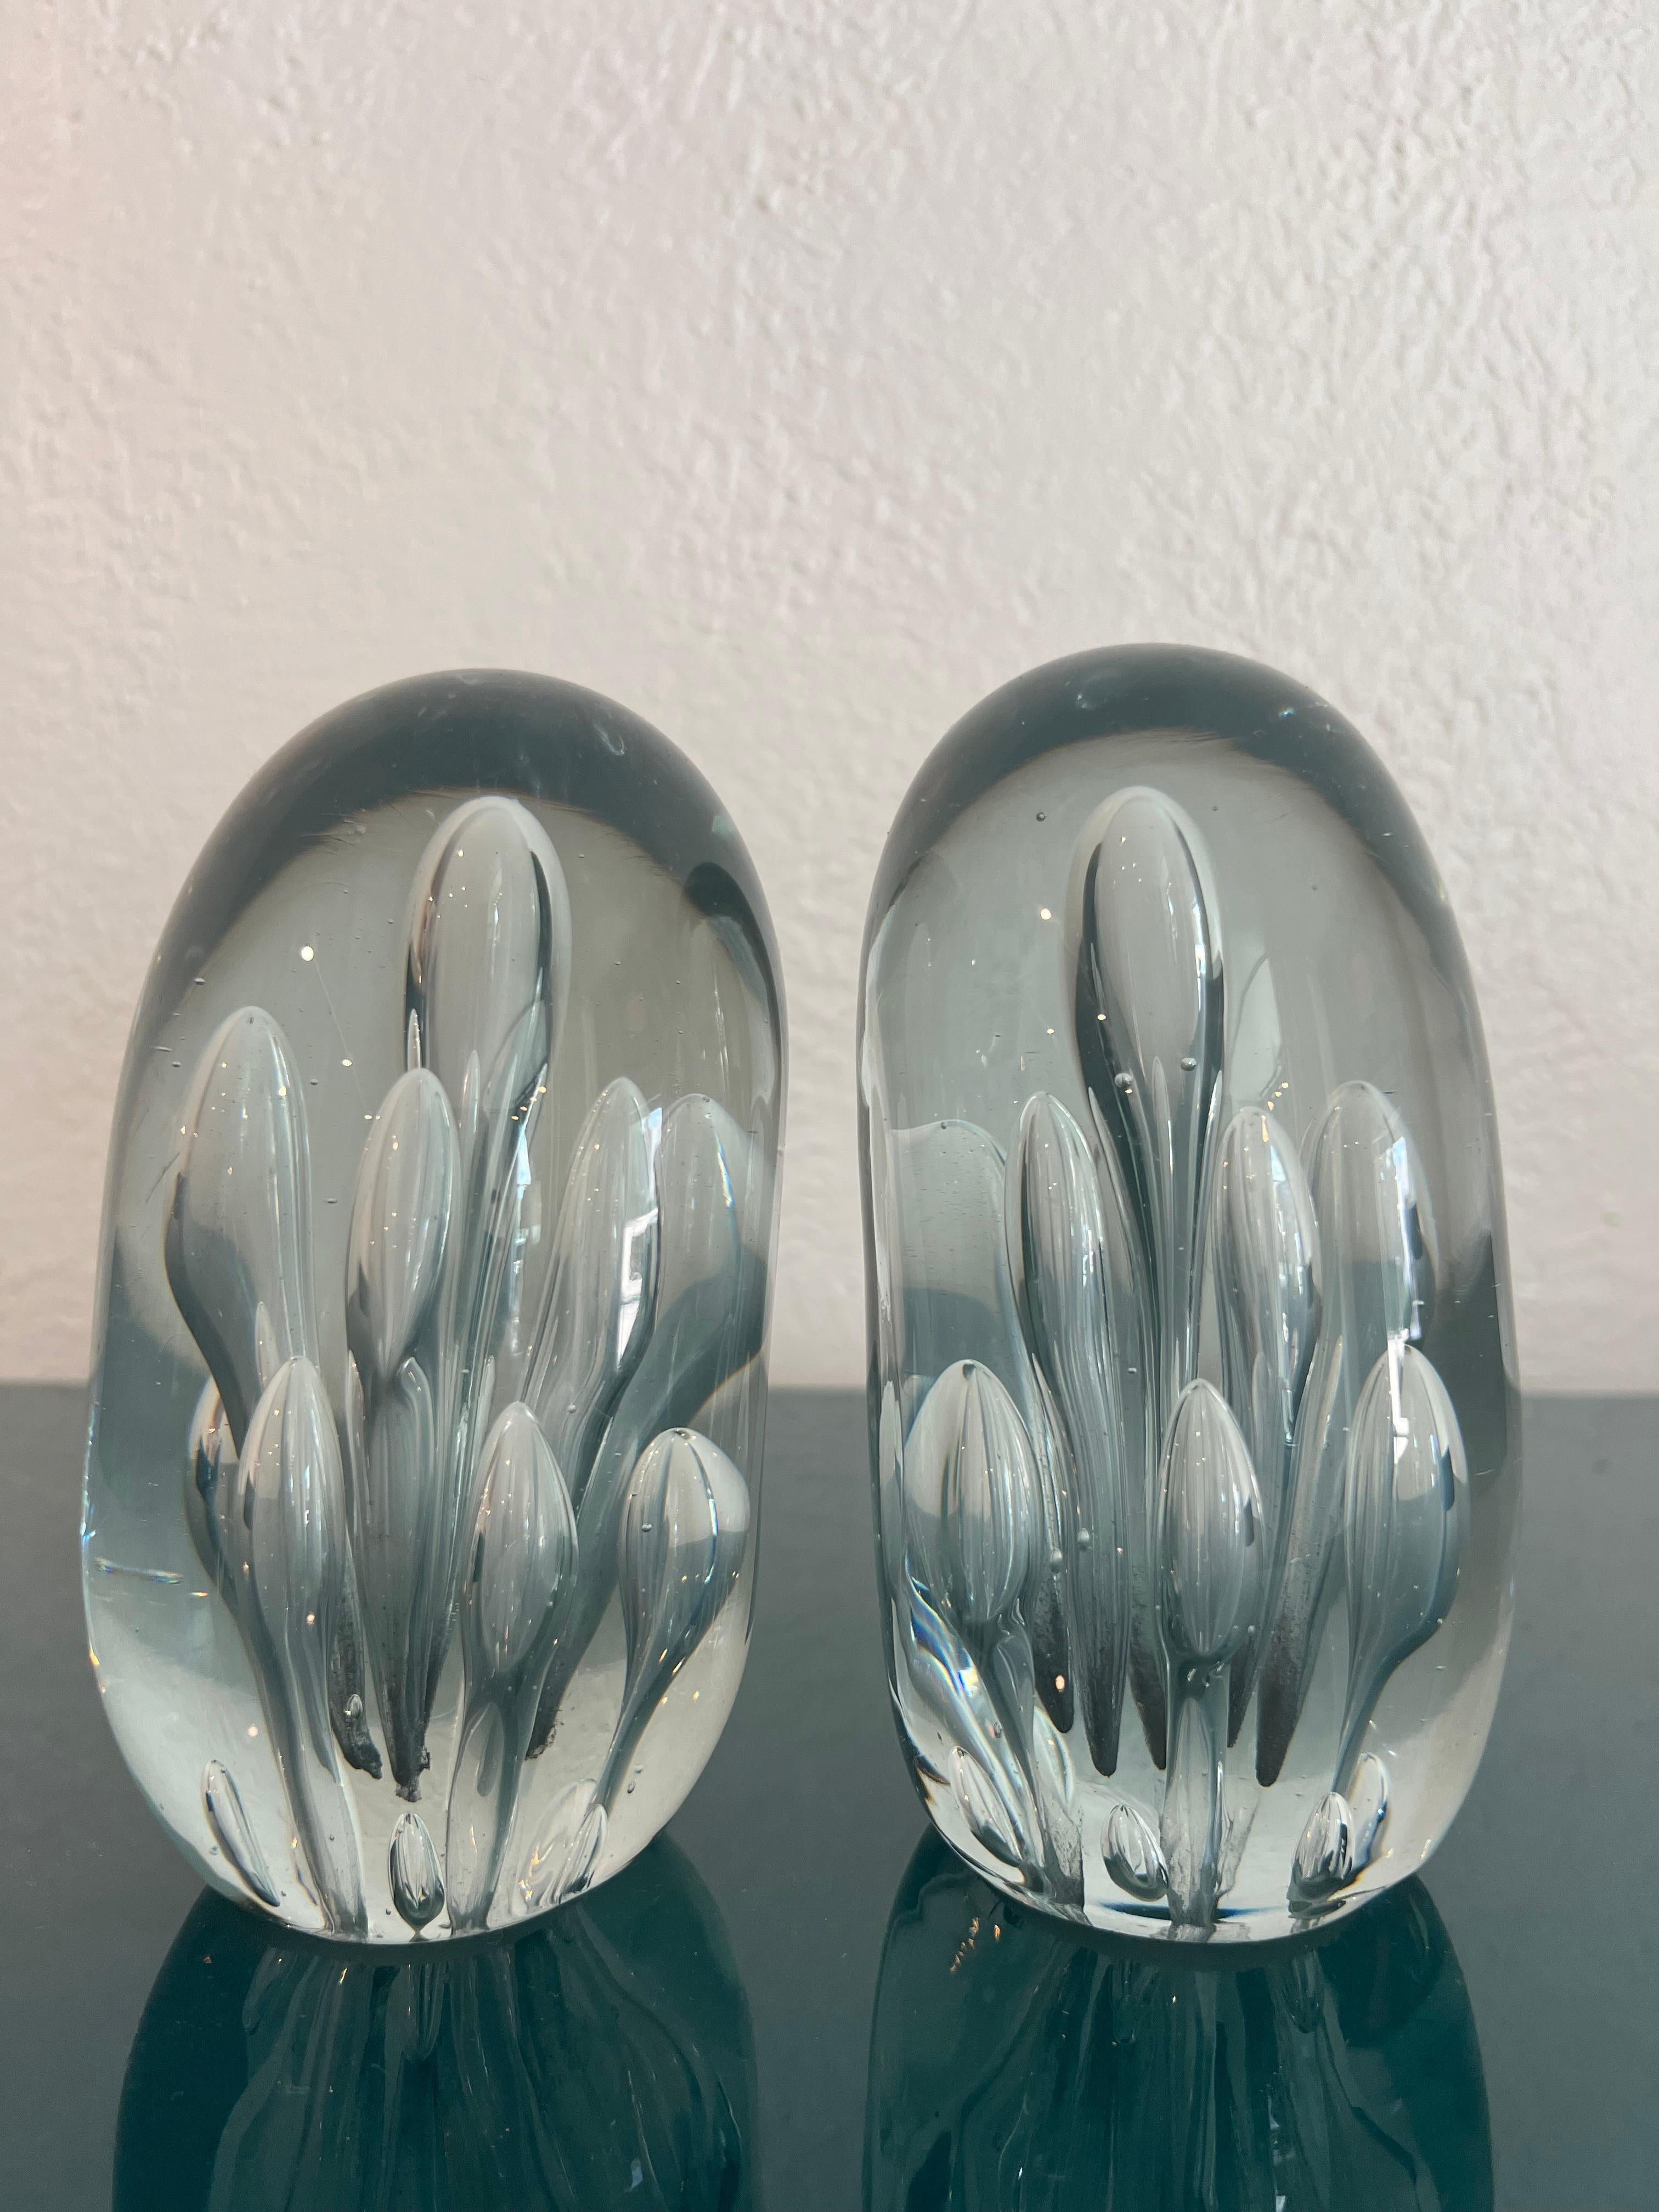 Pair of large Murano glass bookends. Beautiful controlled bubble inclusions. 

Would work well in a variety of interiors such as modern, mid century modern, Hollywood regency, etc. Piece blends seamlessly with other designers such as Warren Platner,